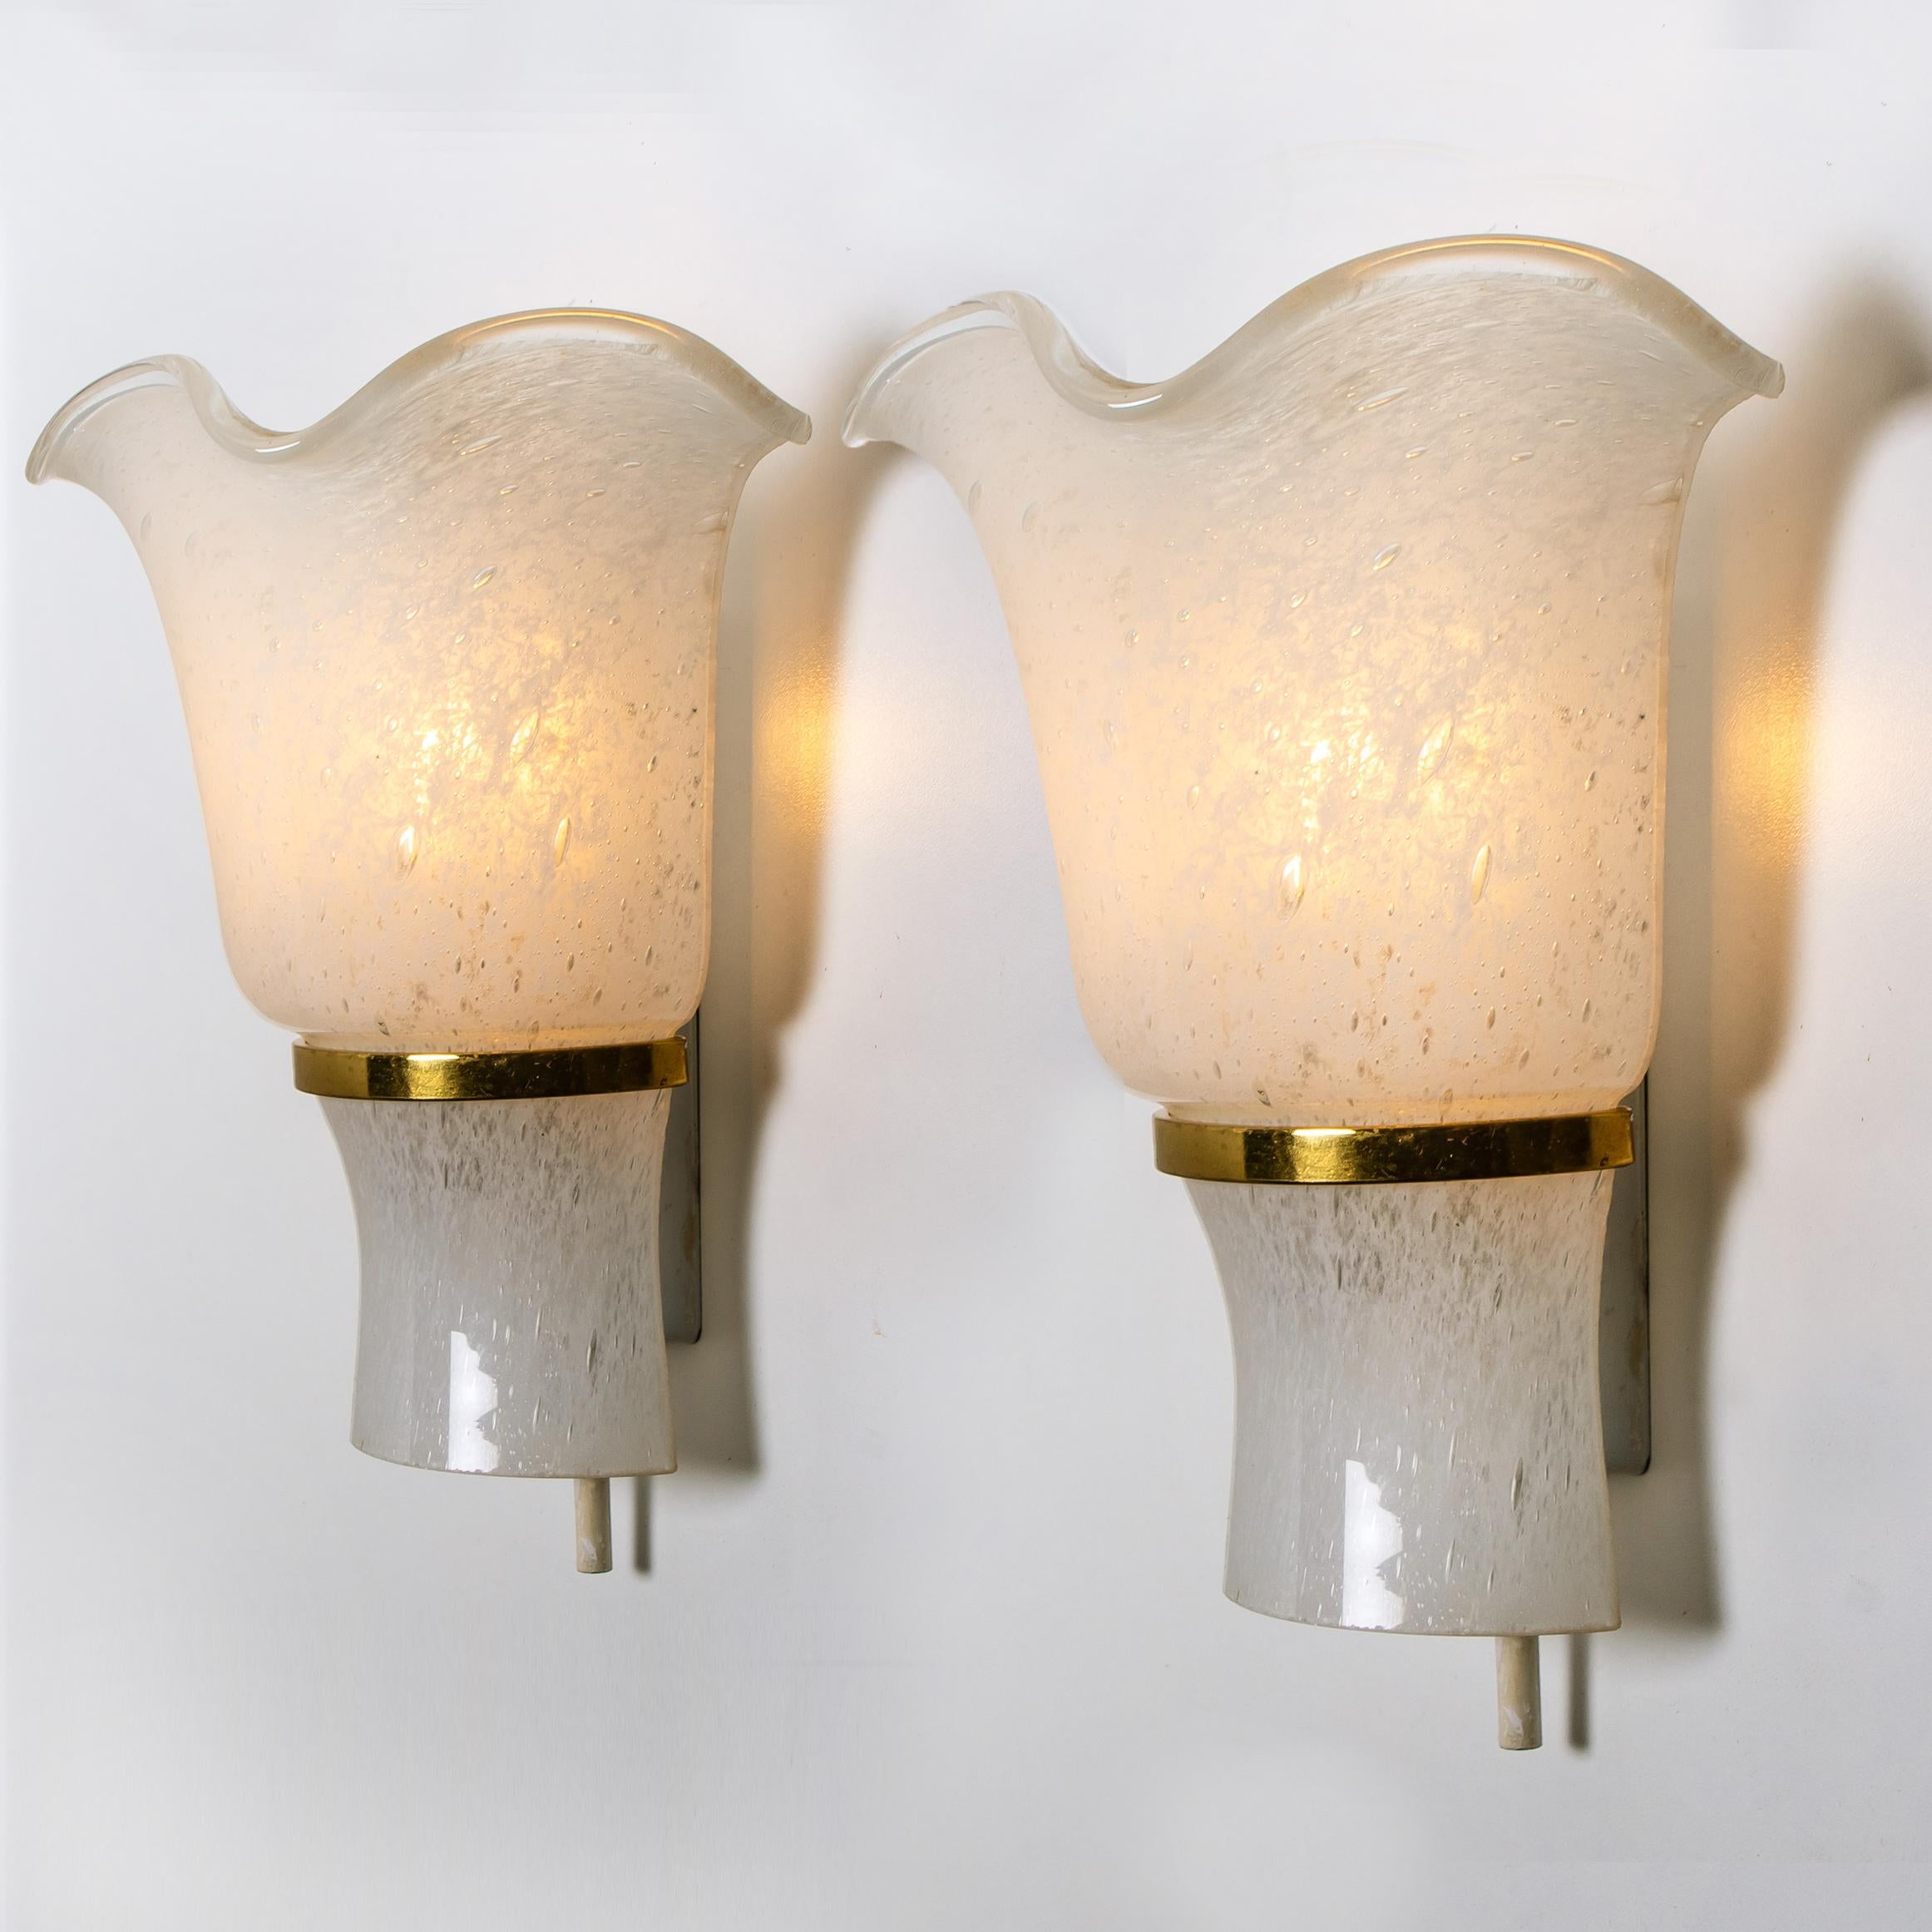 German Pair of Doria Wall Sconces, Brass and Textured Glass, 1960s